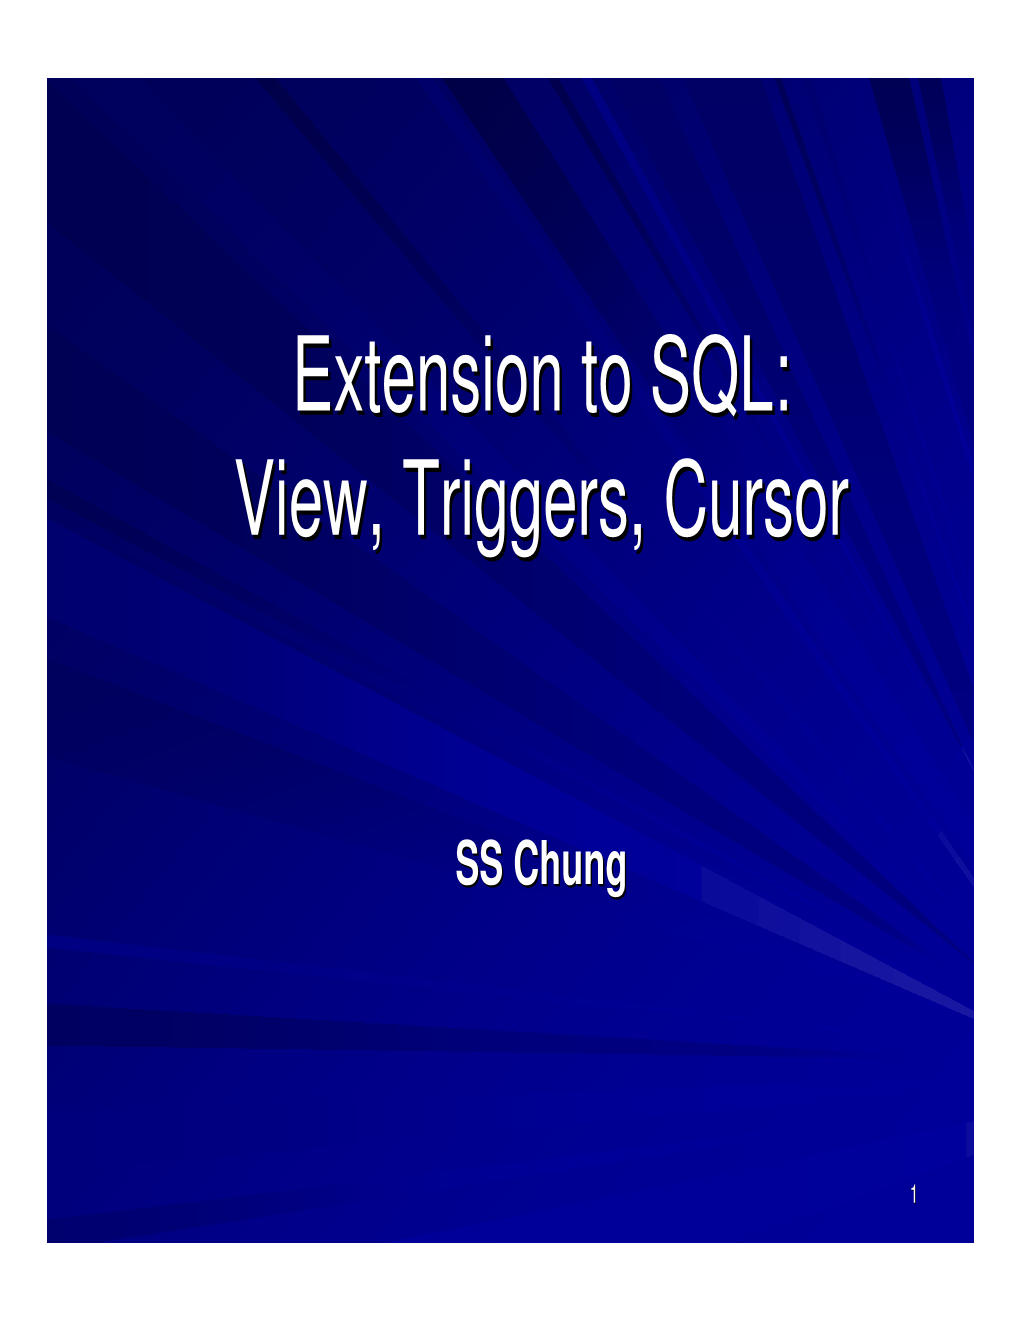 Extension to SQL: View, Triggers, Cursor